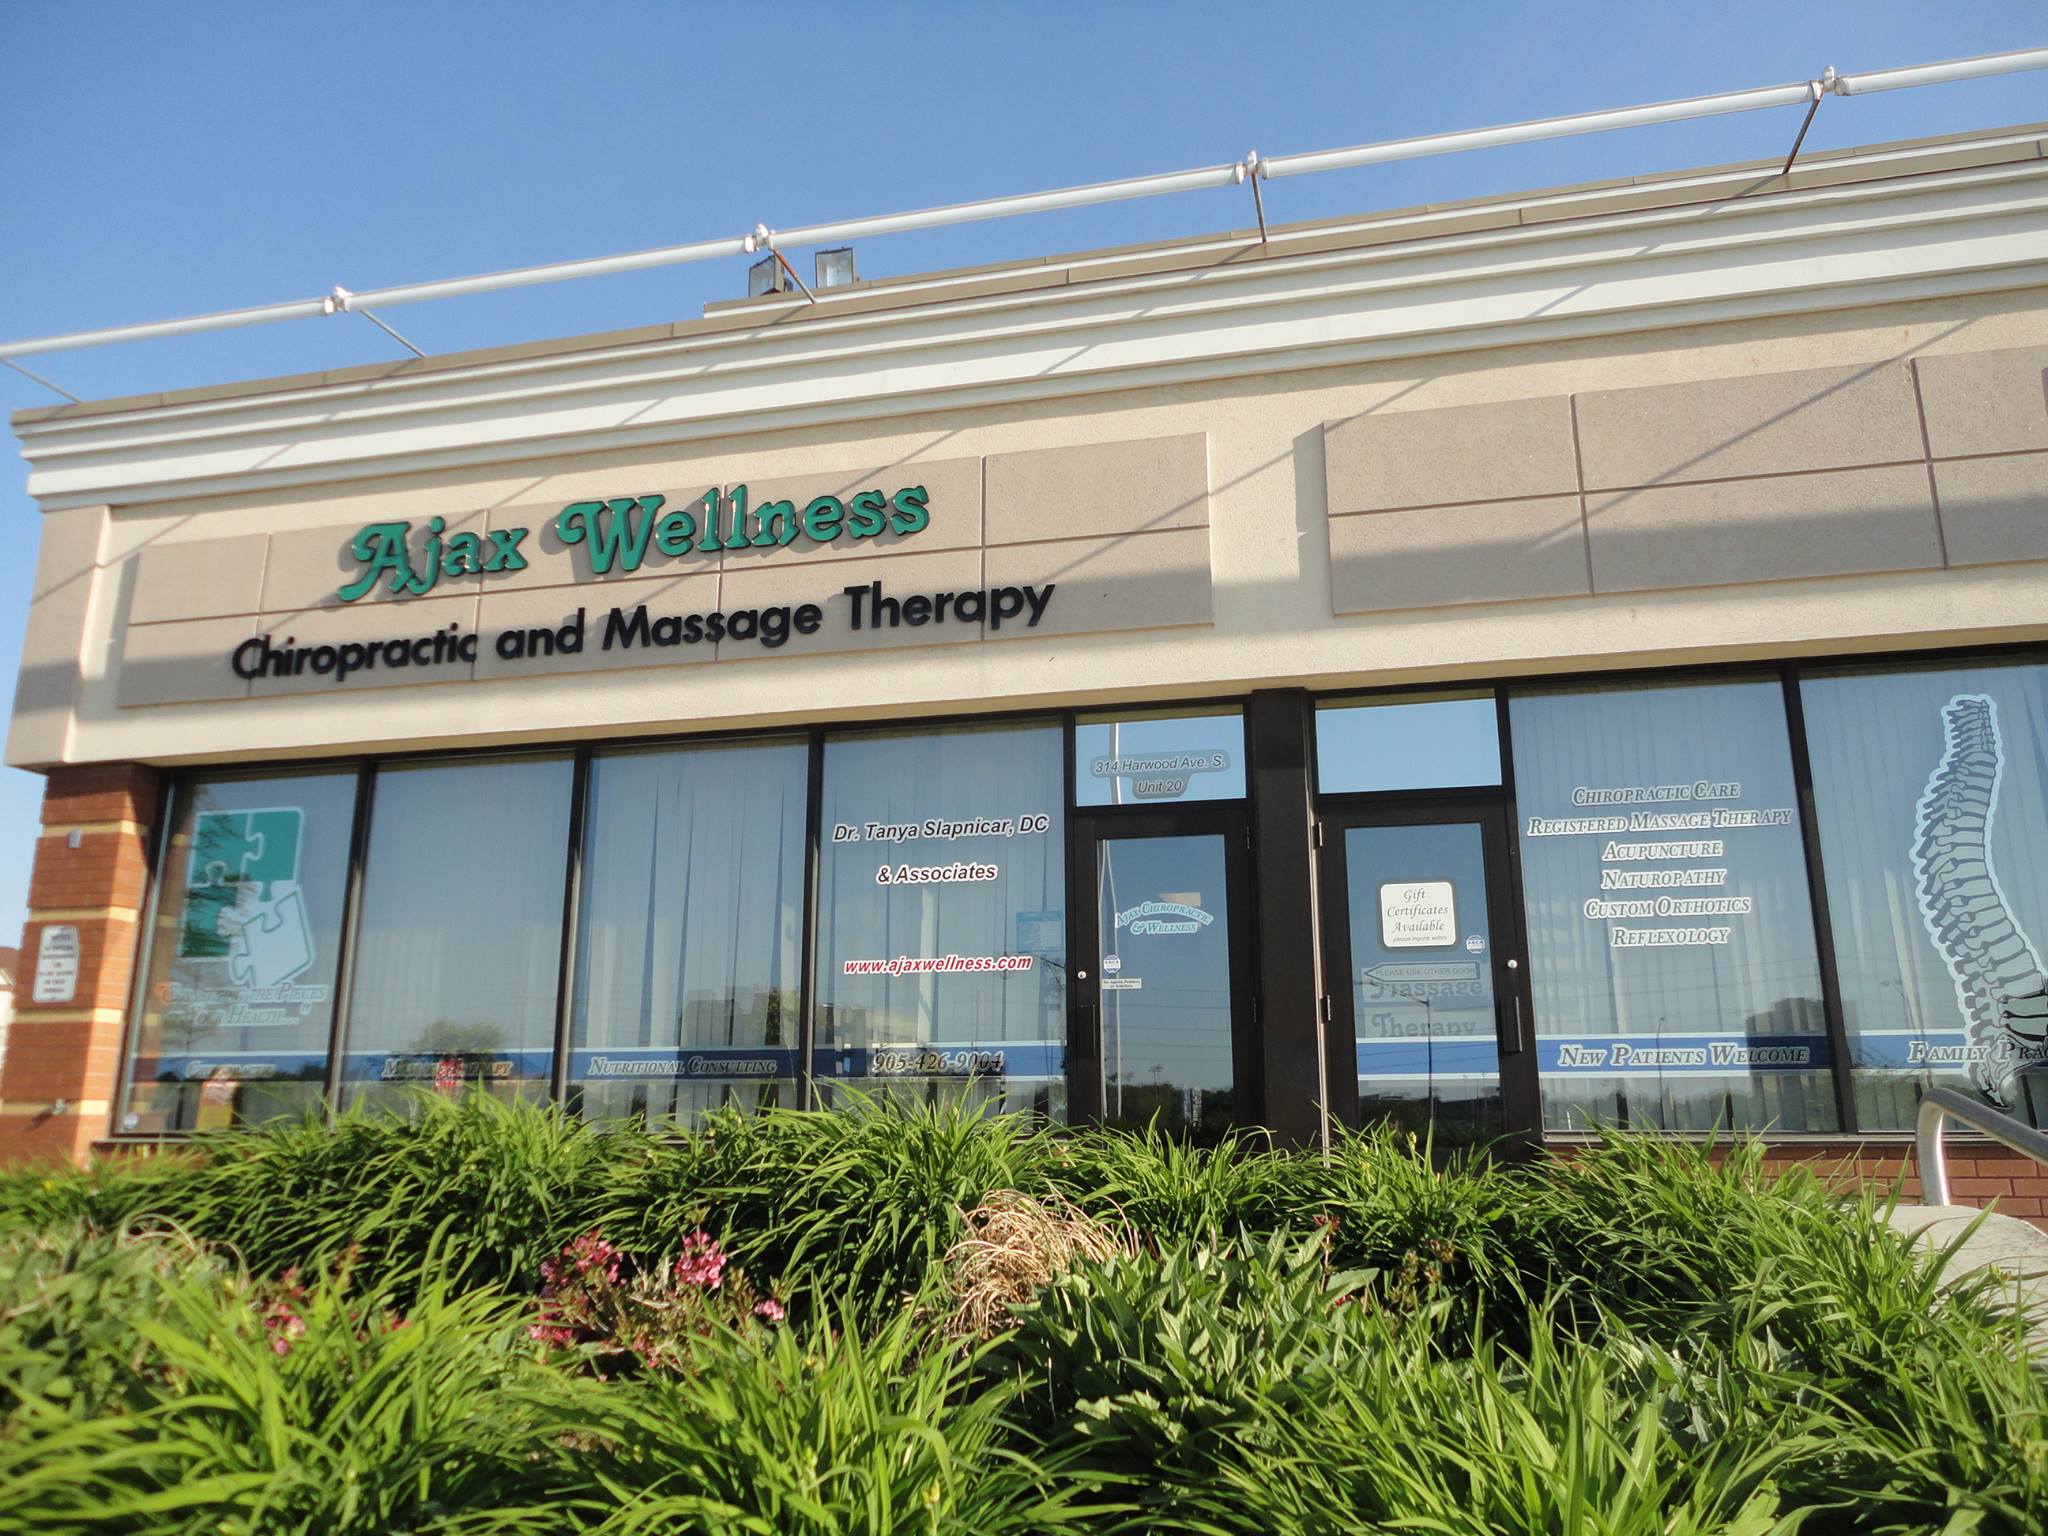 Ajax Wellness Chiropractic and Massage Therapy Building